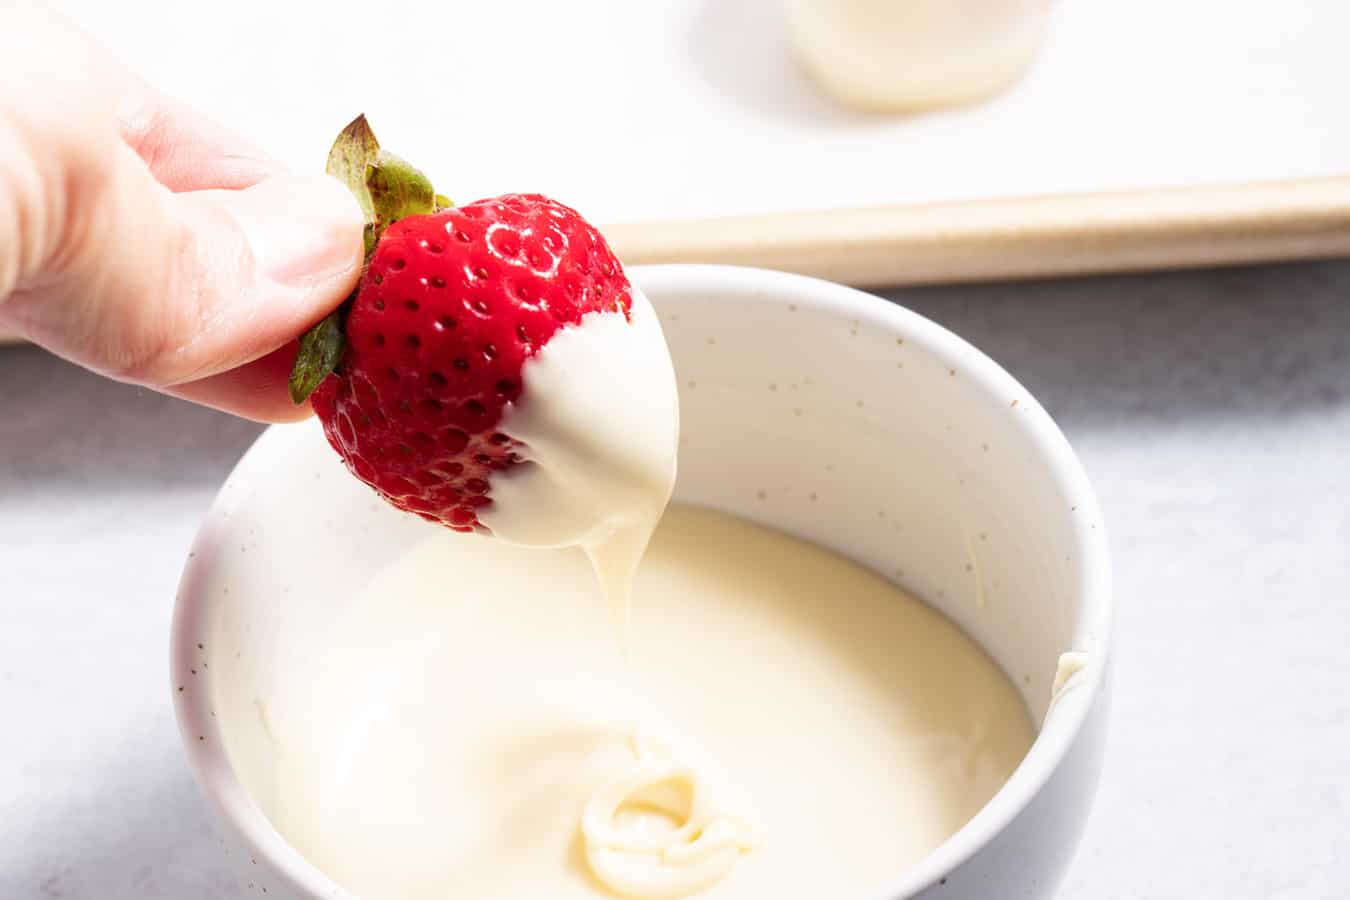 Strawberry being dipped in white chocolate.